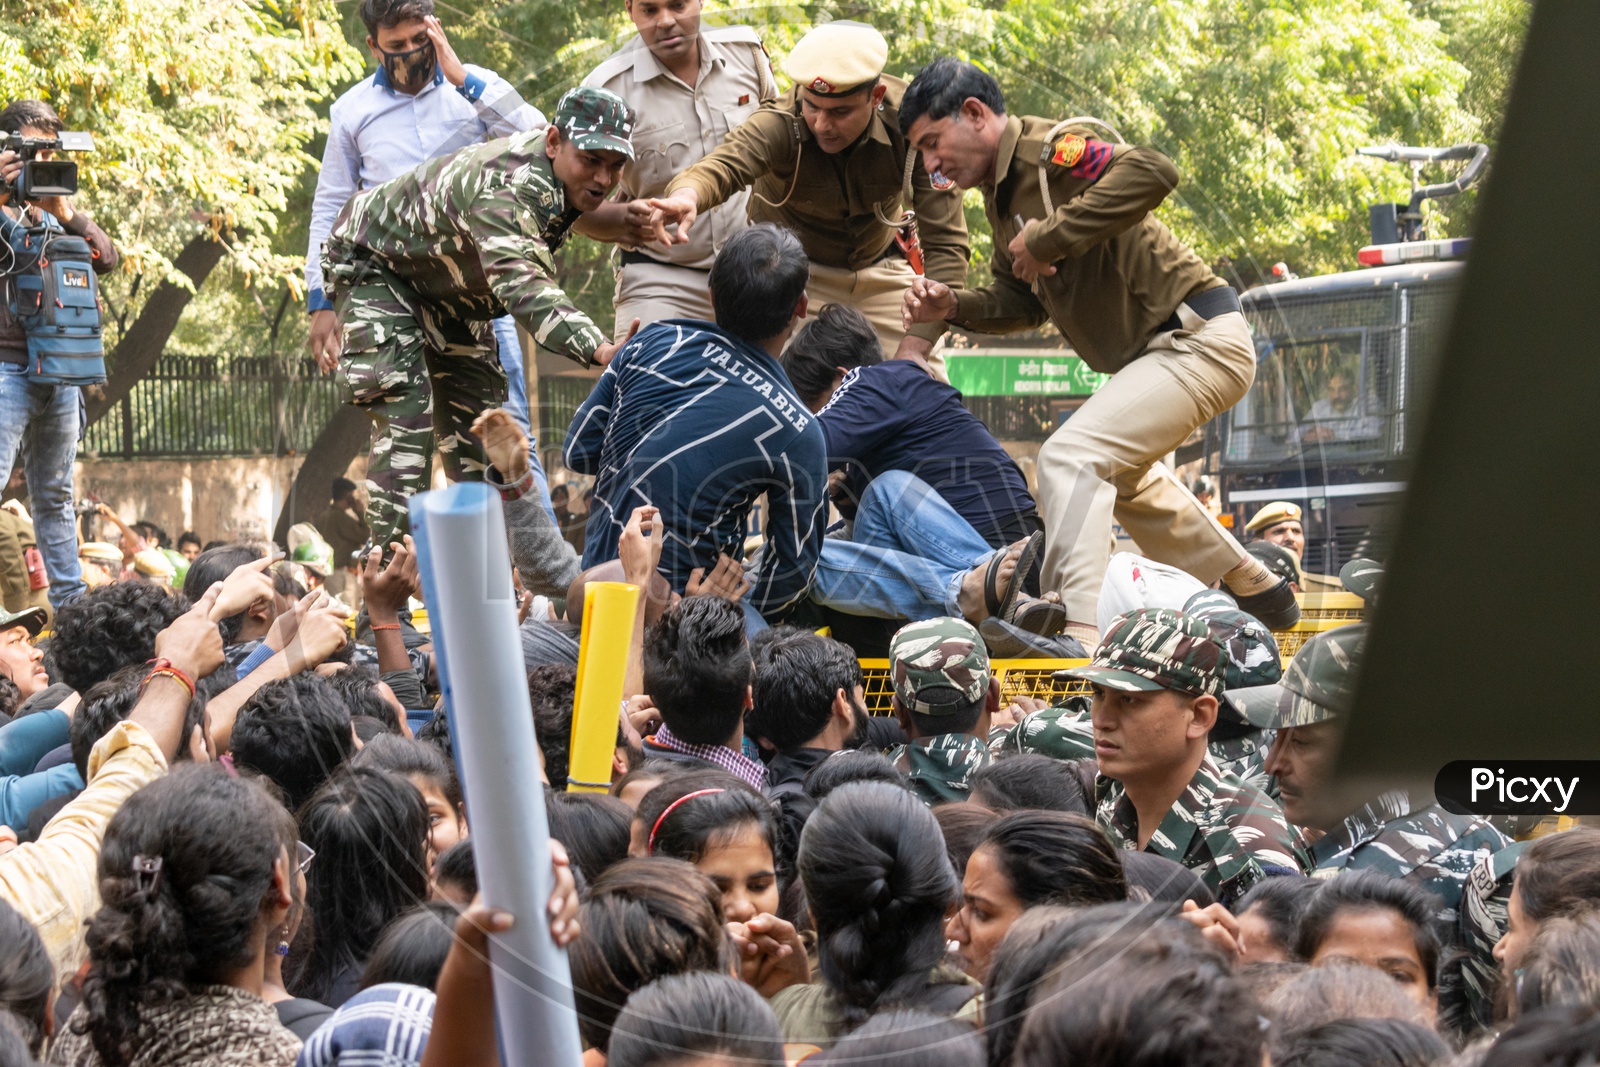 JNU(Jawaharlal Nehru University) students protesting against fee hike, 'National Education Policy 2019' (NEP) and other issues related to Education during a march to parliament and Delhi police personnel and CRPF Jawans trying to stop them